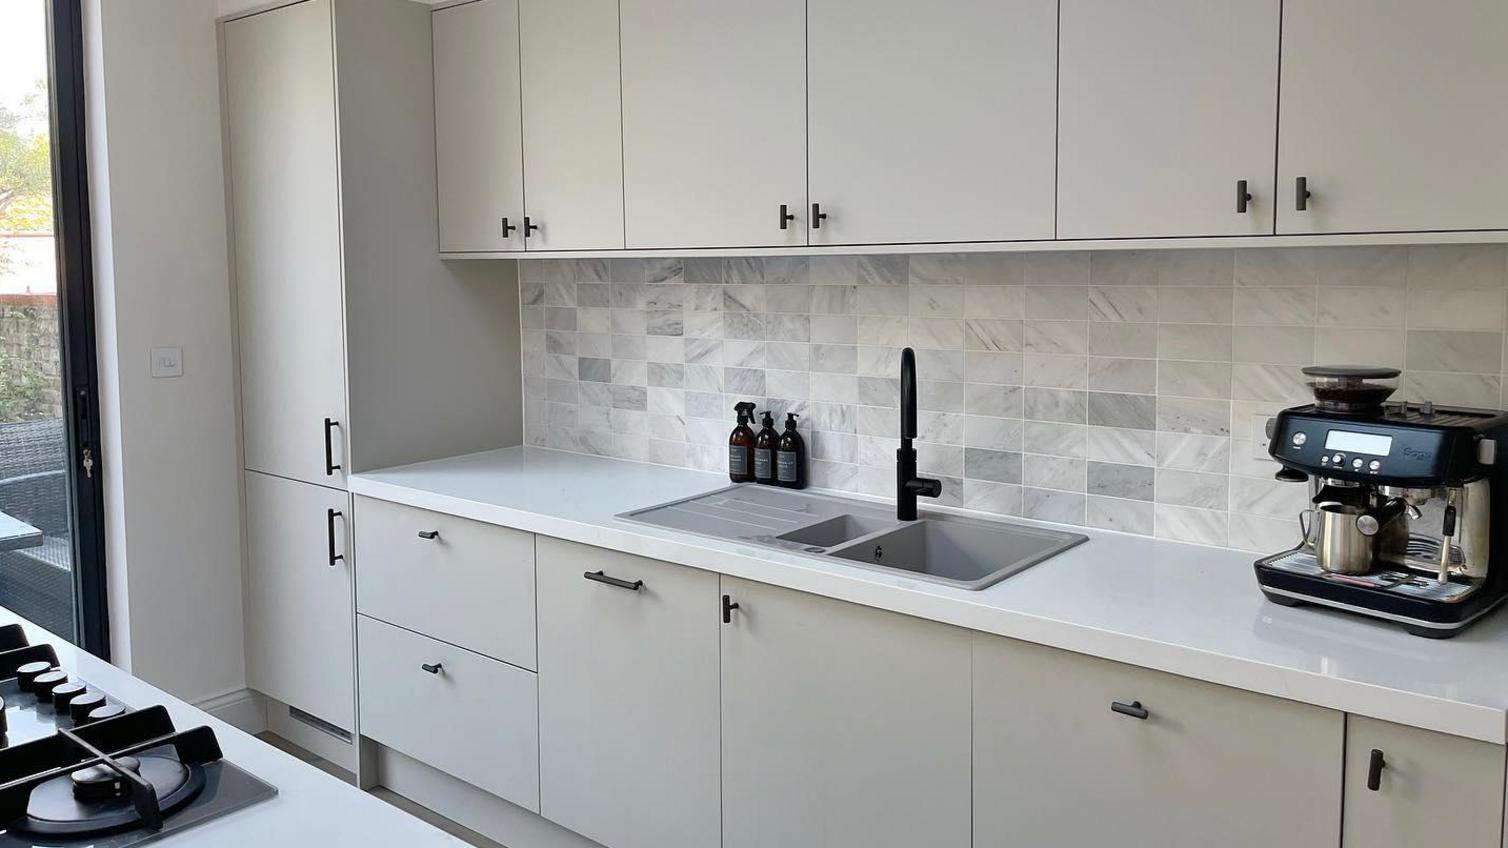 A simple cream kitchen idea using sandstone slab units. Features black handles, white worktops, and a grey, composite sink.